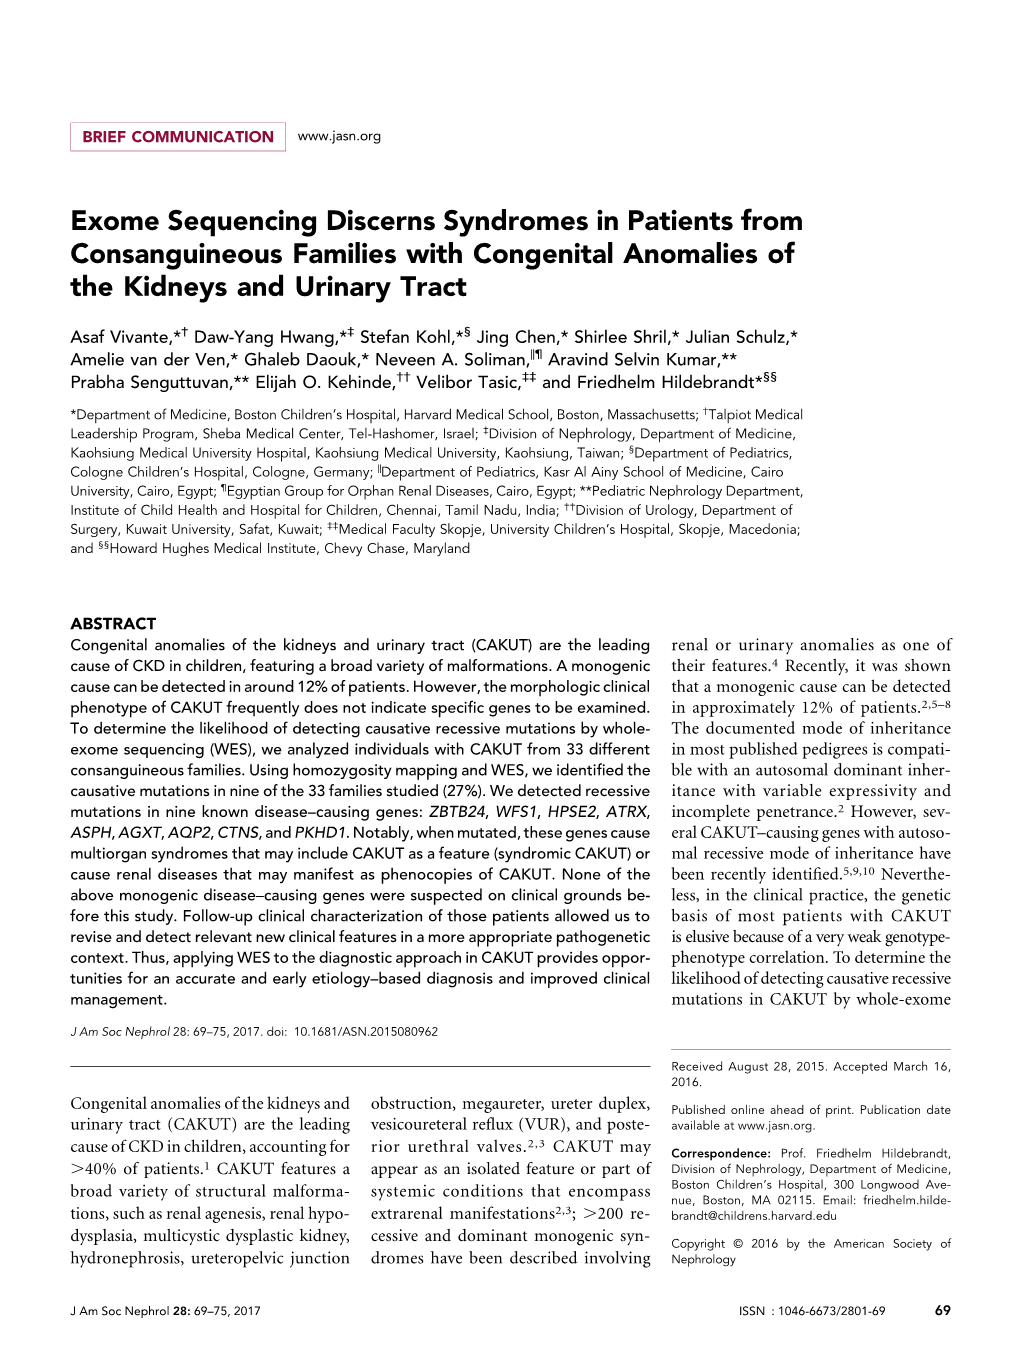 Exome Sequencing Discerns Syndromes in Patients from Consanguineous Families with Congenital Anomalies of the Kidneys and Urinary Tract